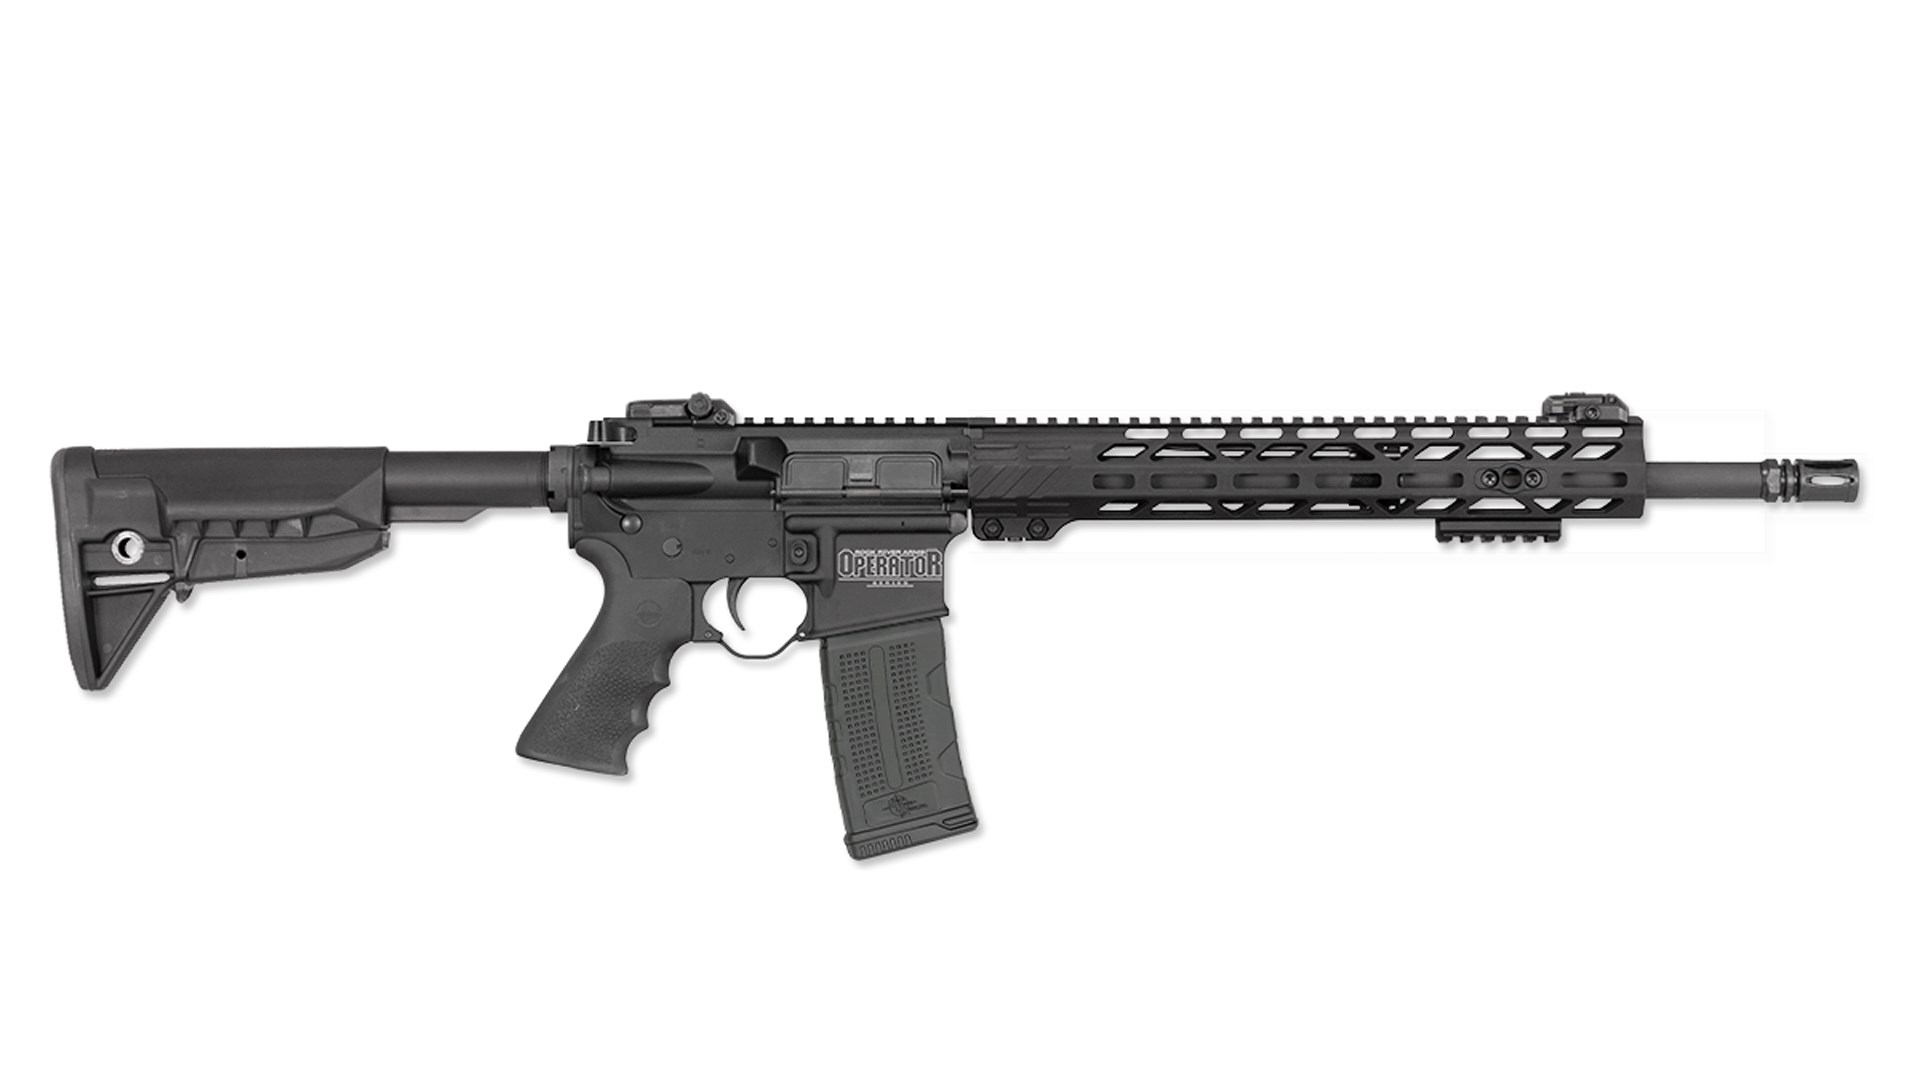 A Rock River Arms Operator DMR shown in 5.56 NATO with a 16-inch barrel.